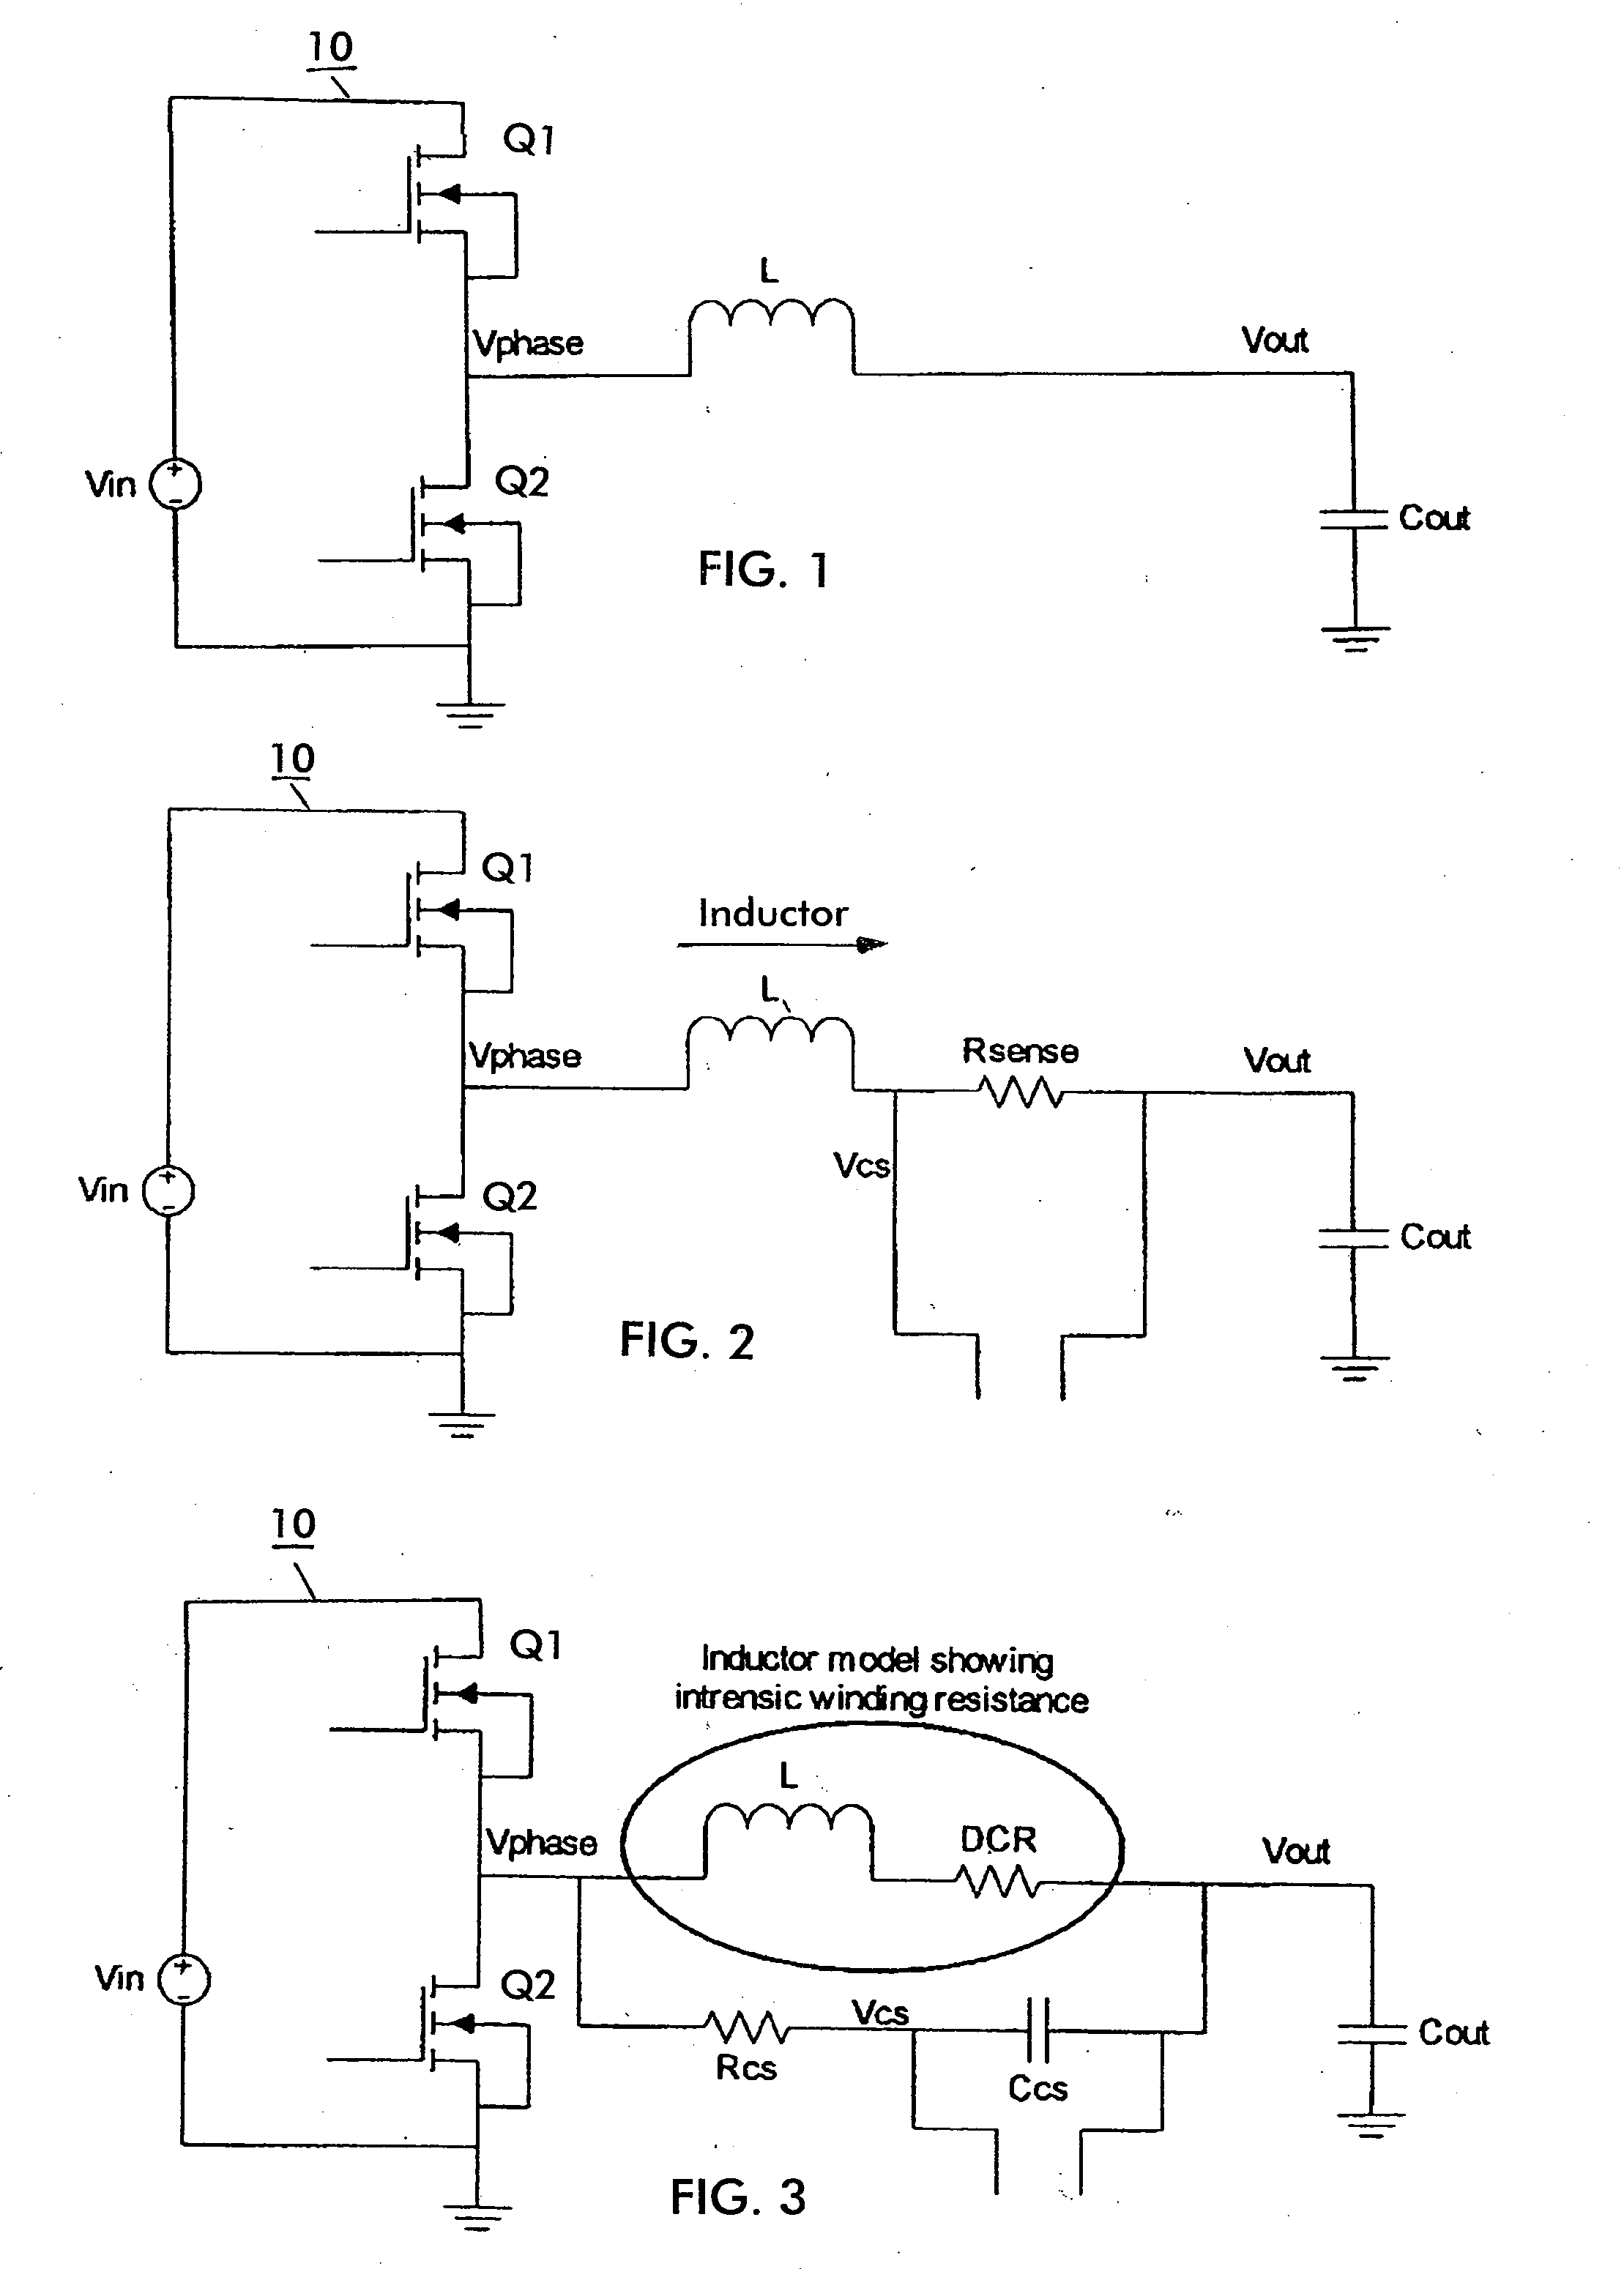 Digital power monitoring circuit and system